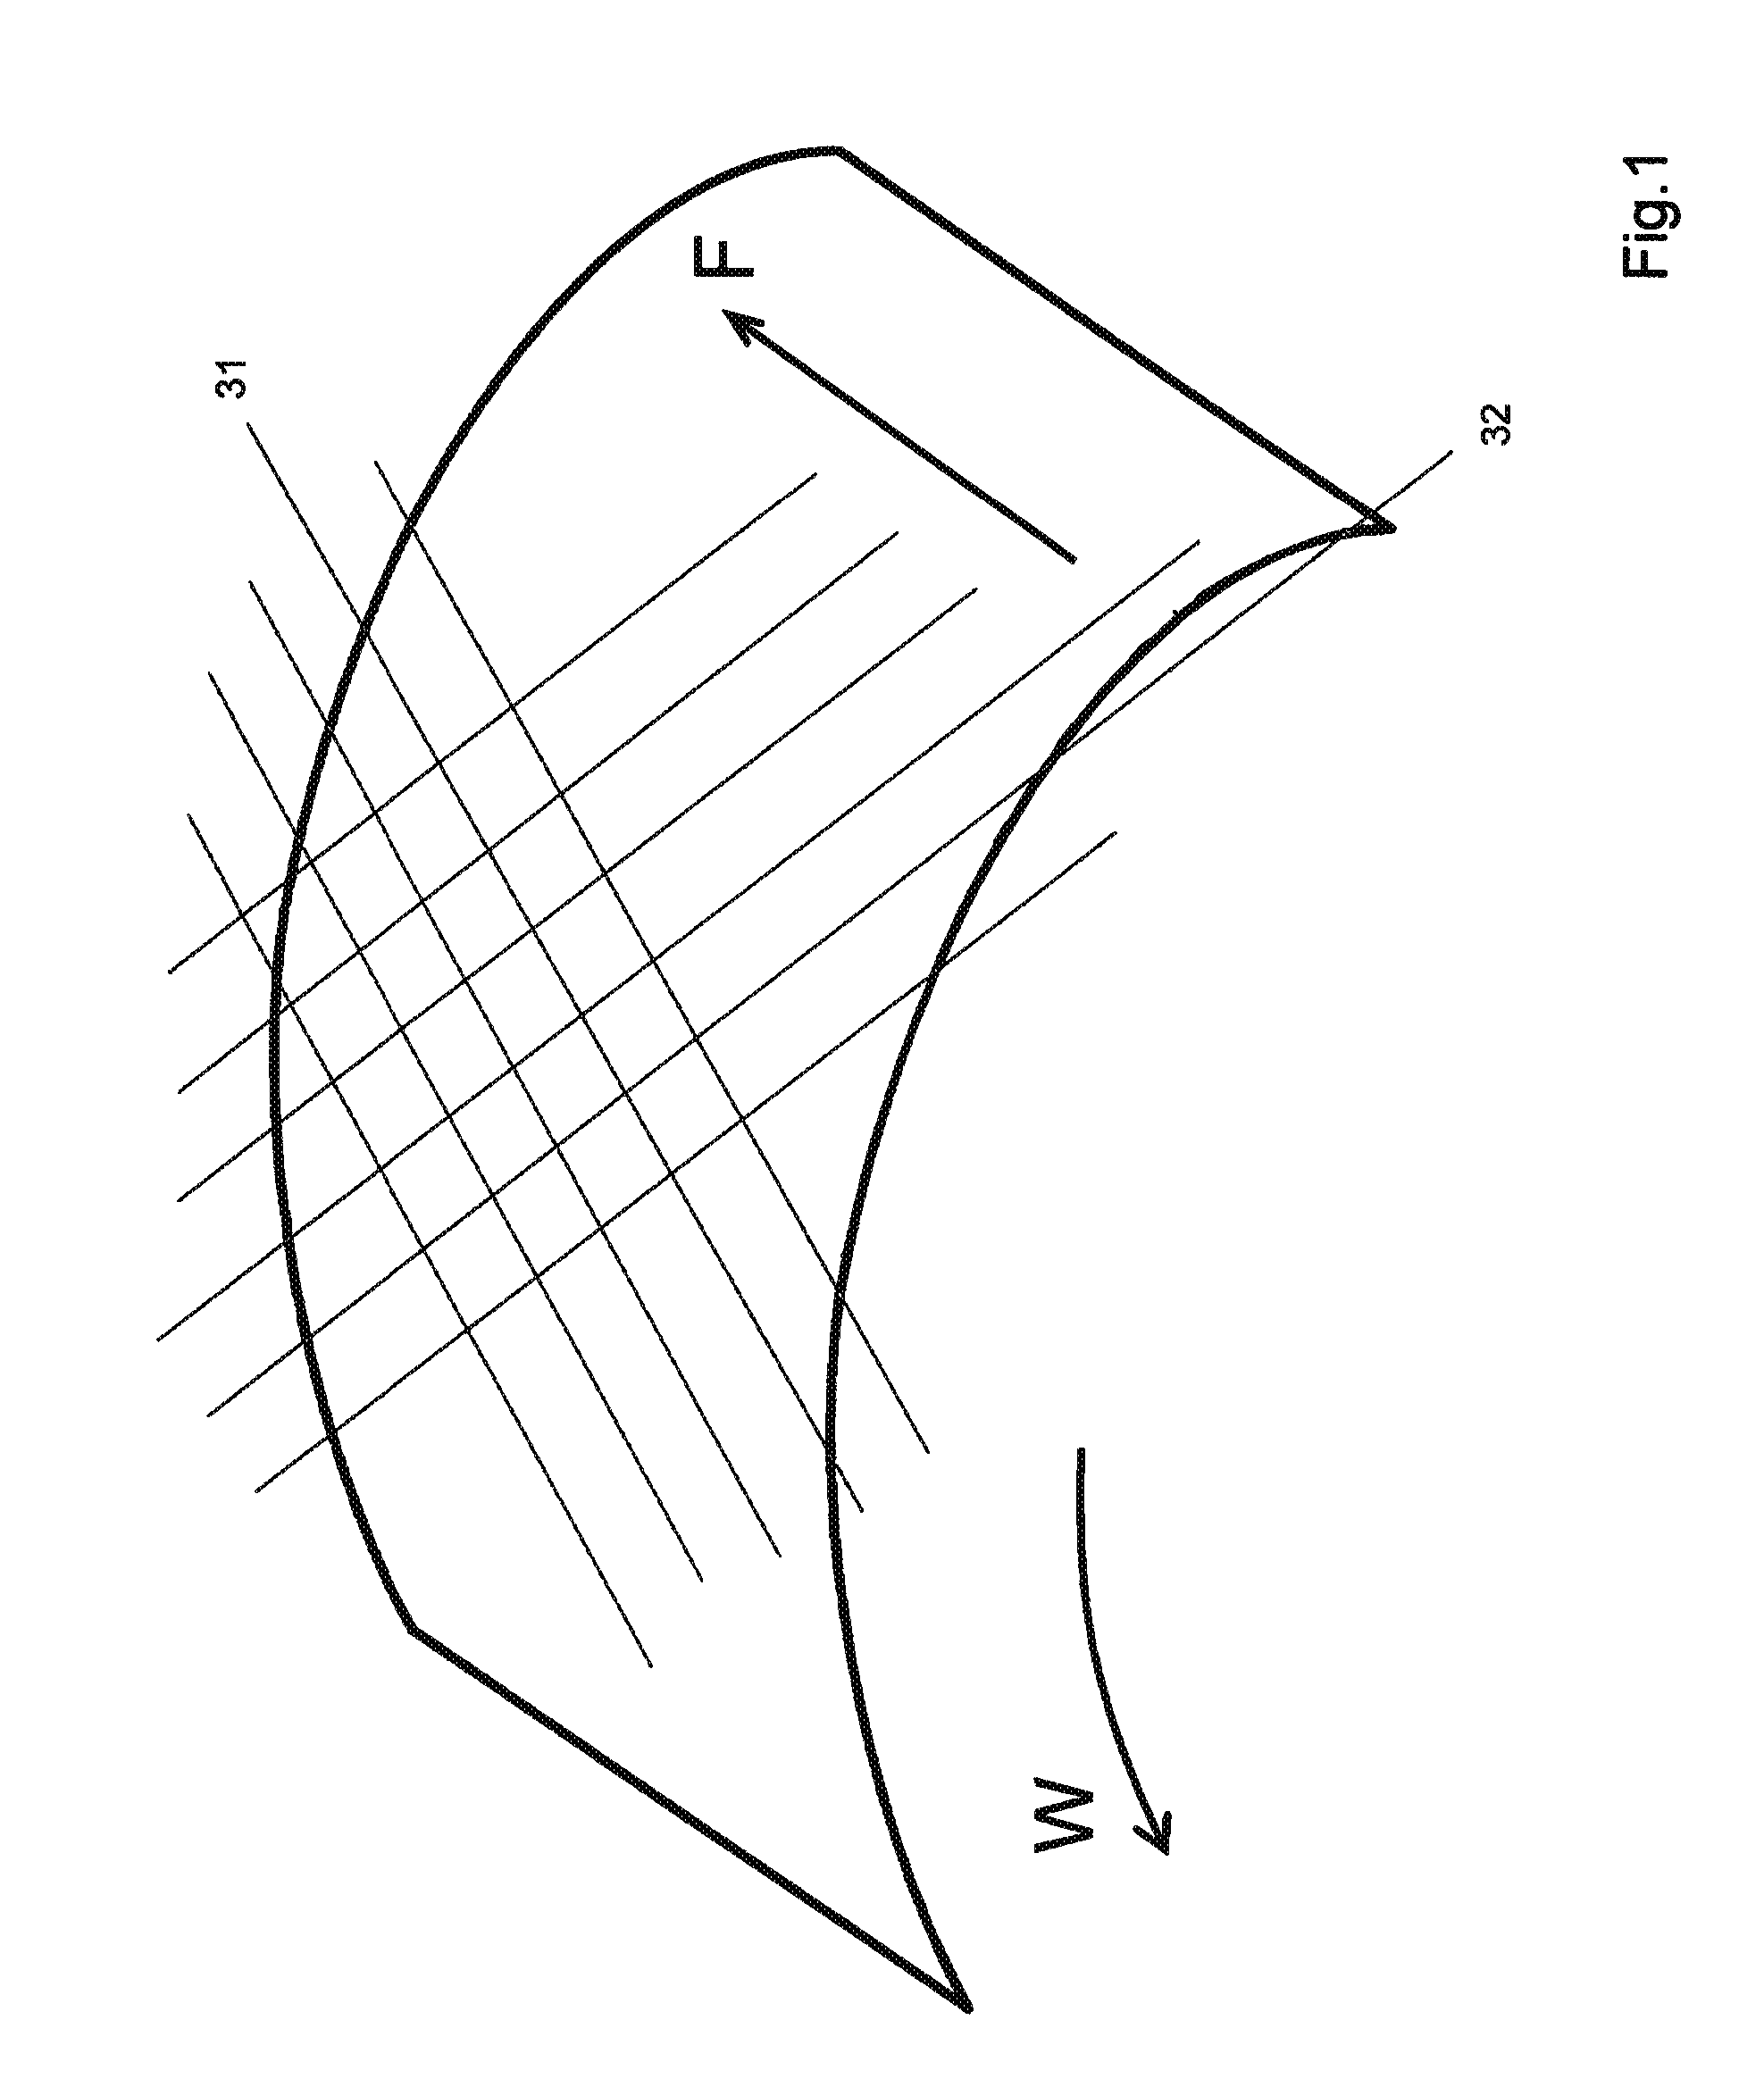 Surface structure for a working device